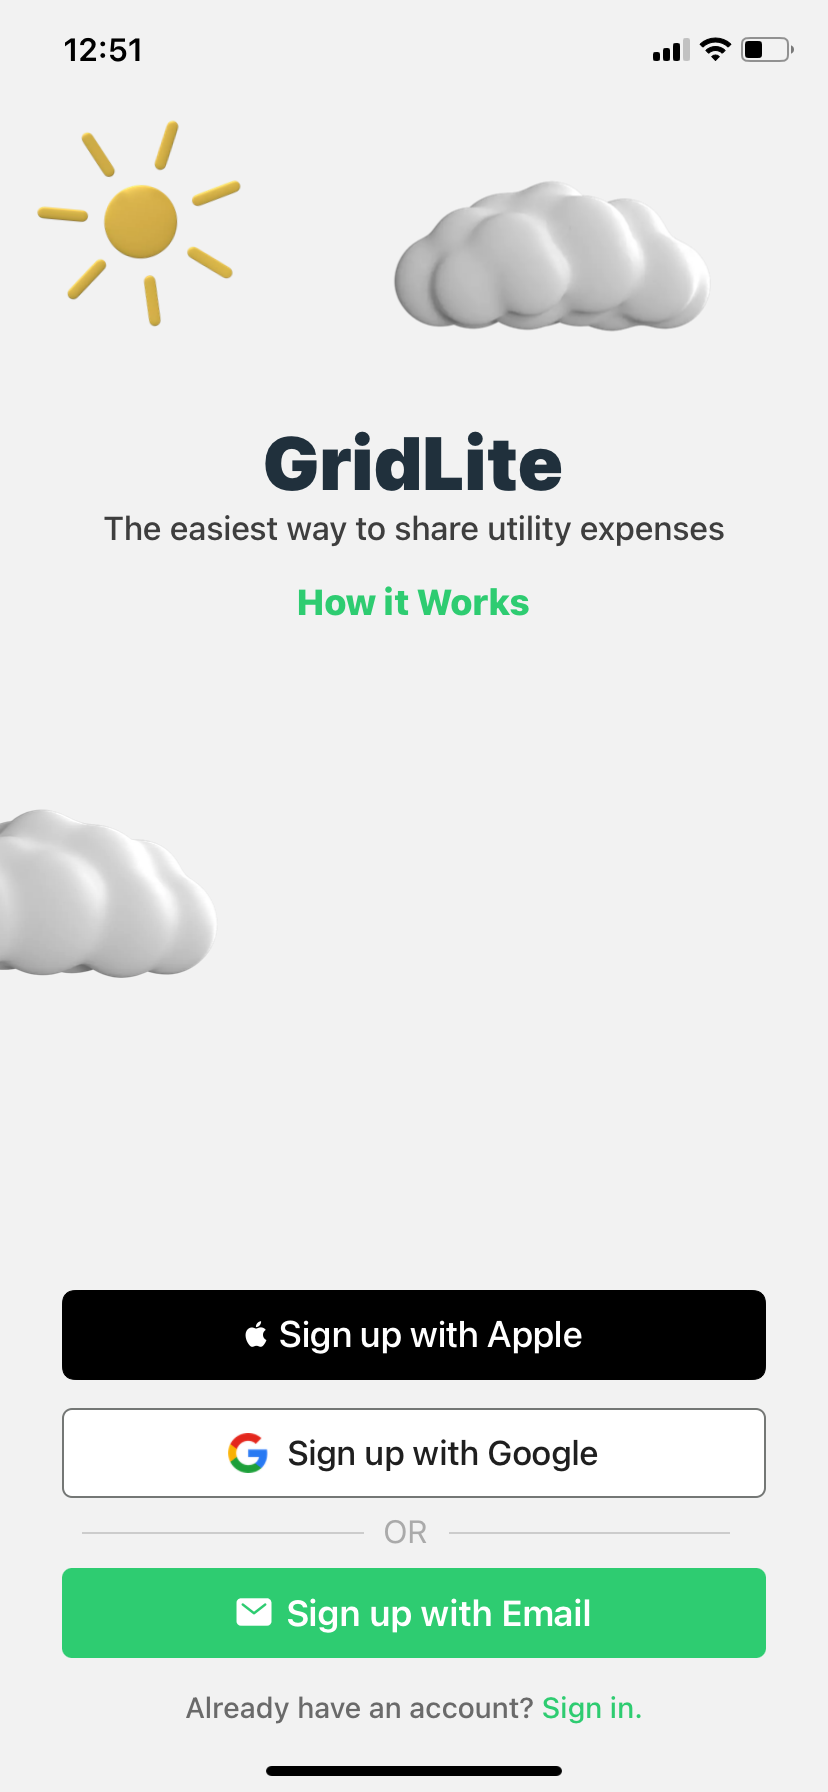 startuptile GridLite-The easiest way to automatically split utility bills